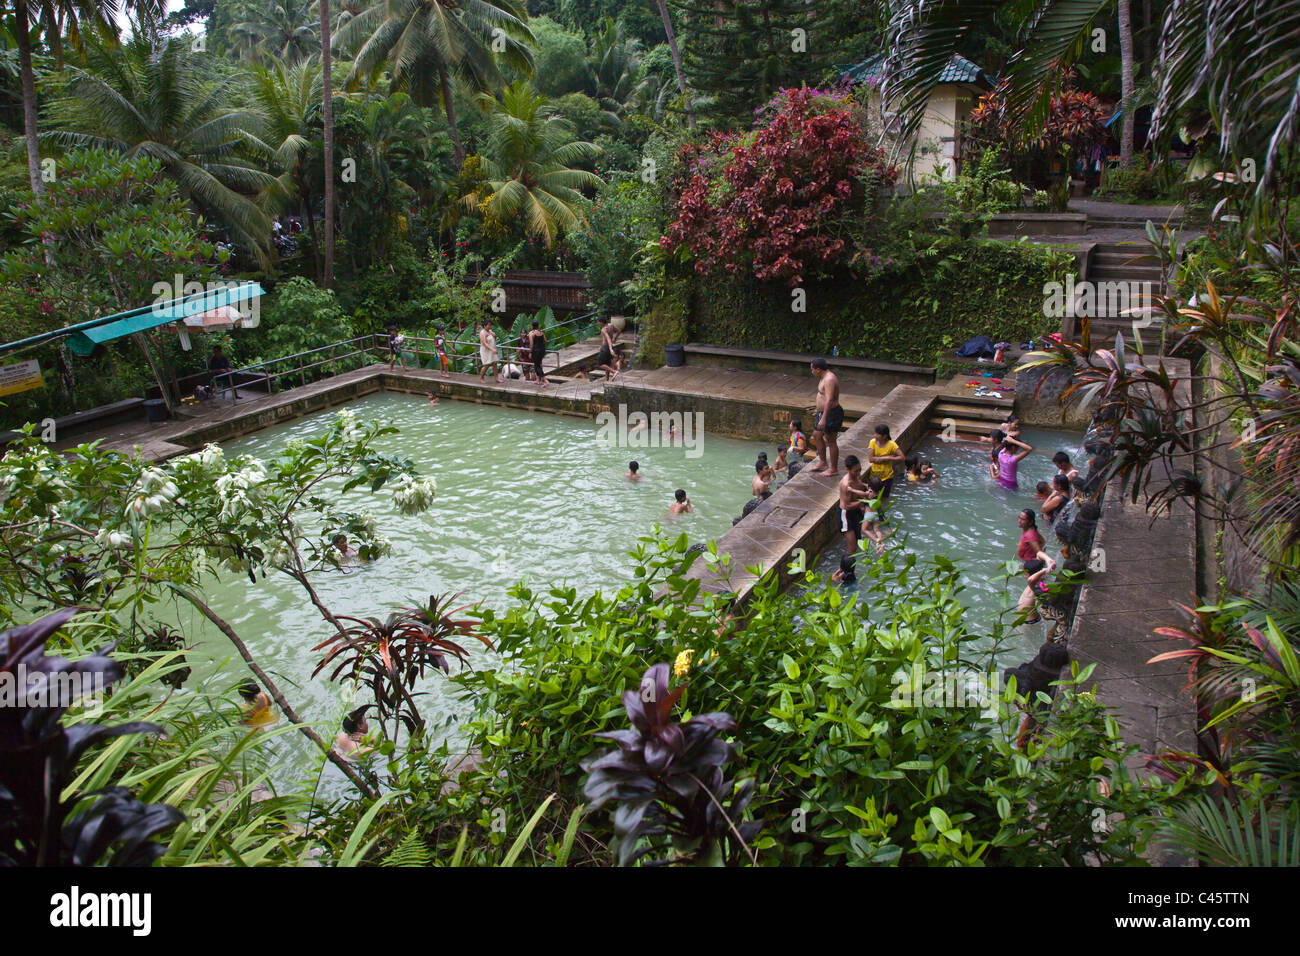 Air Panas Banjar Is A Hot Spring Located Near Lovina In The North Of The Island Bali